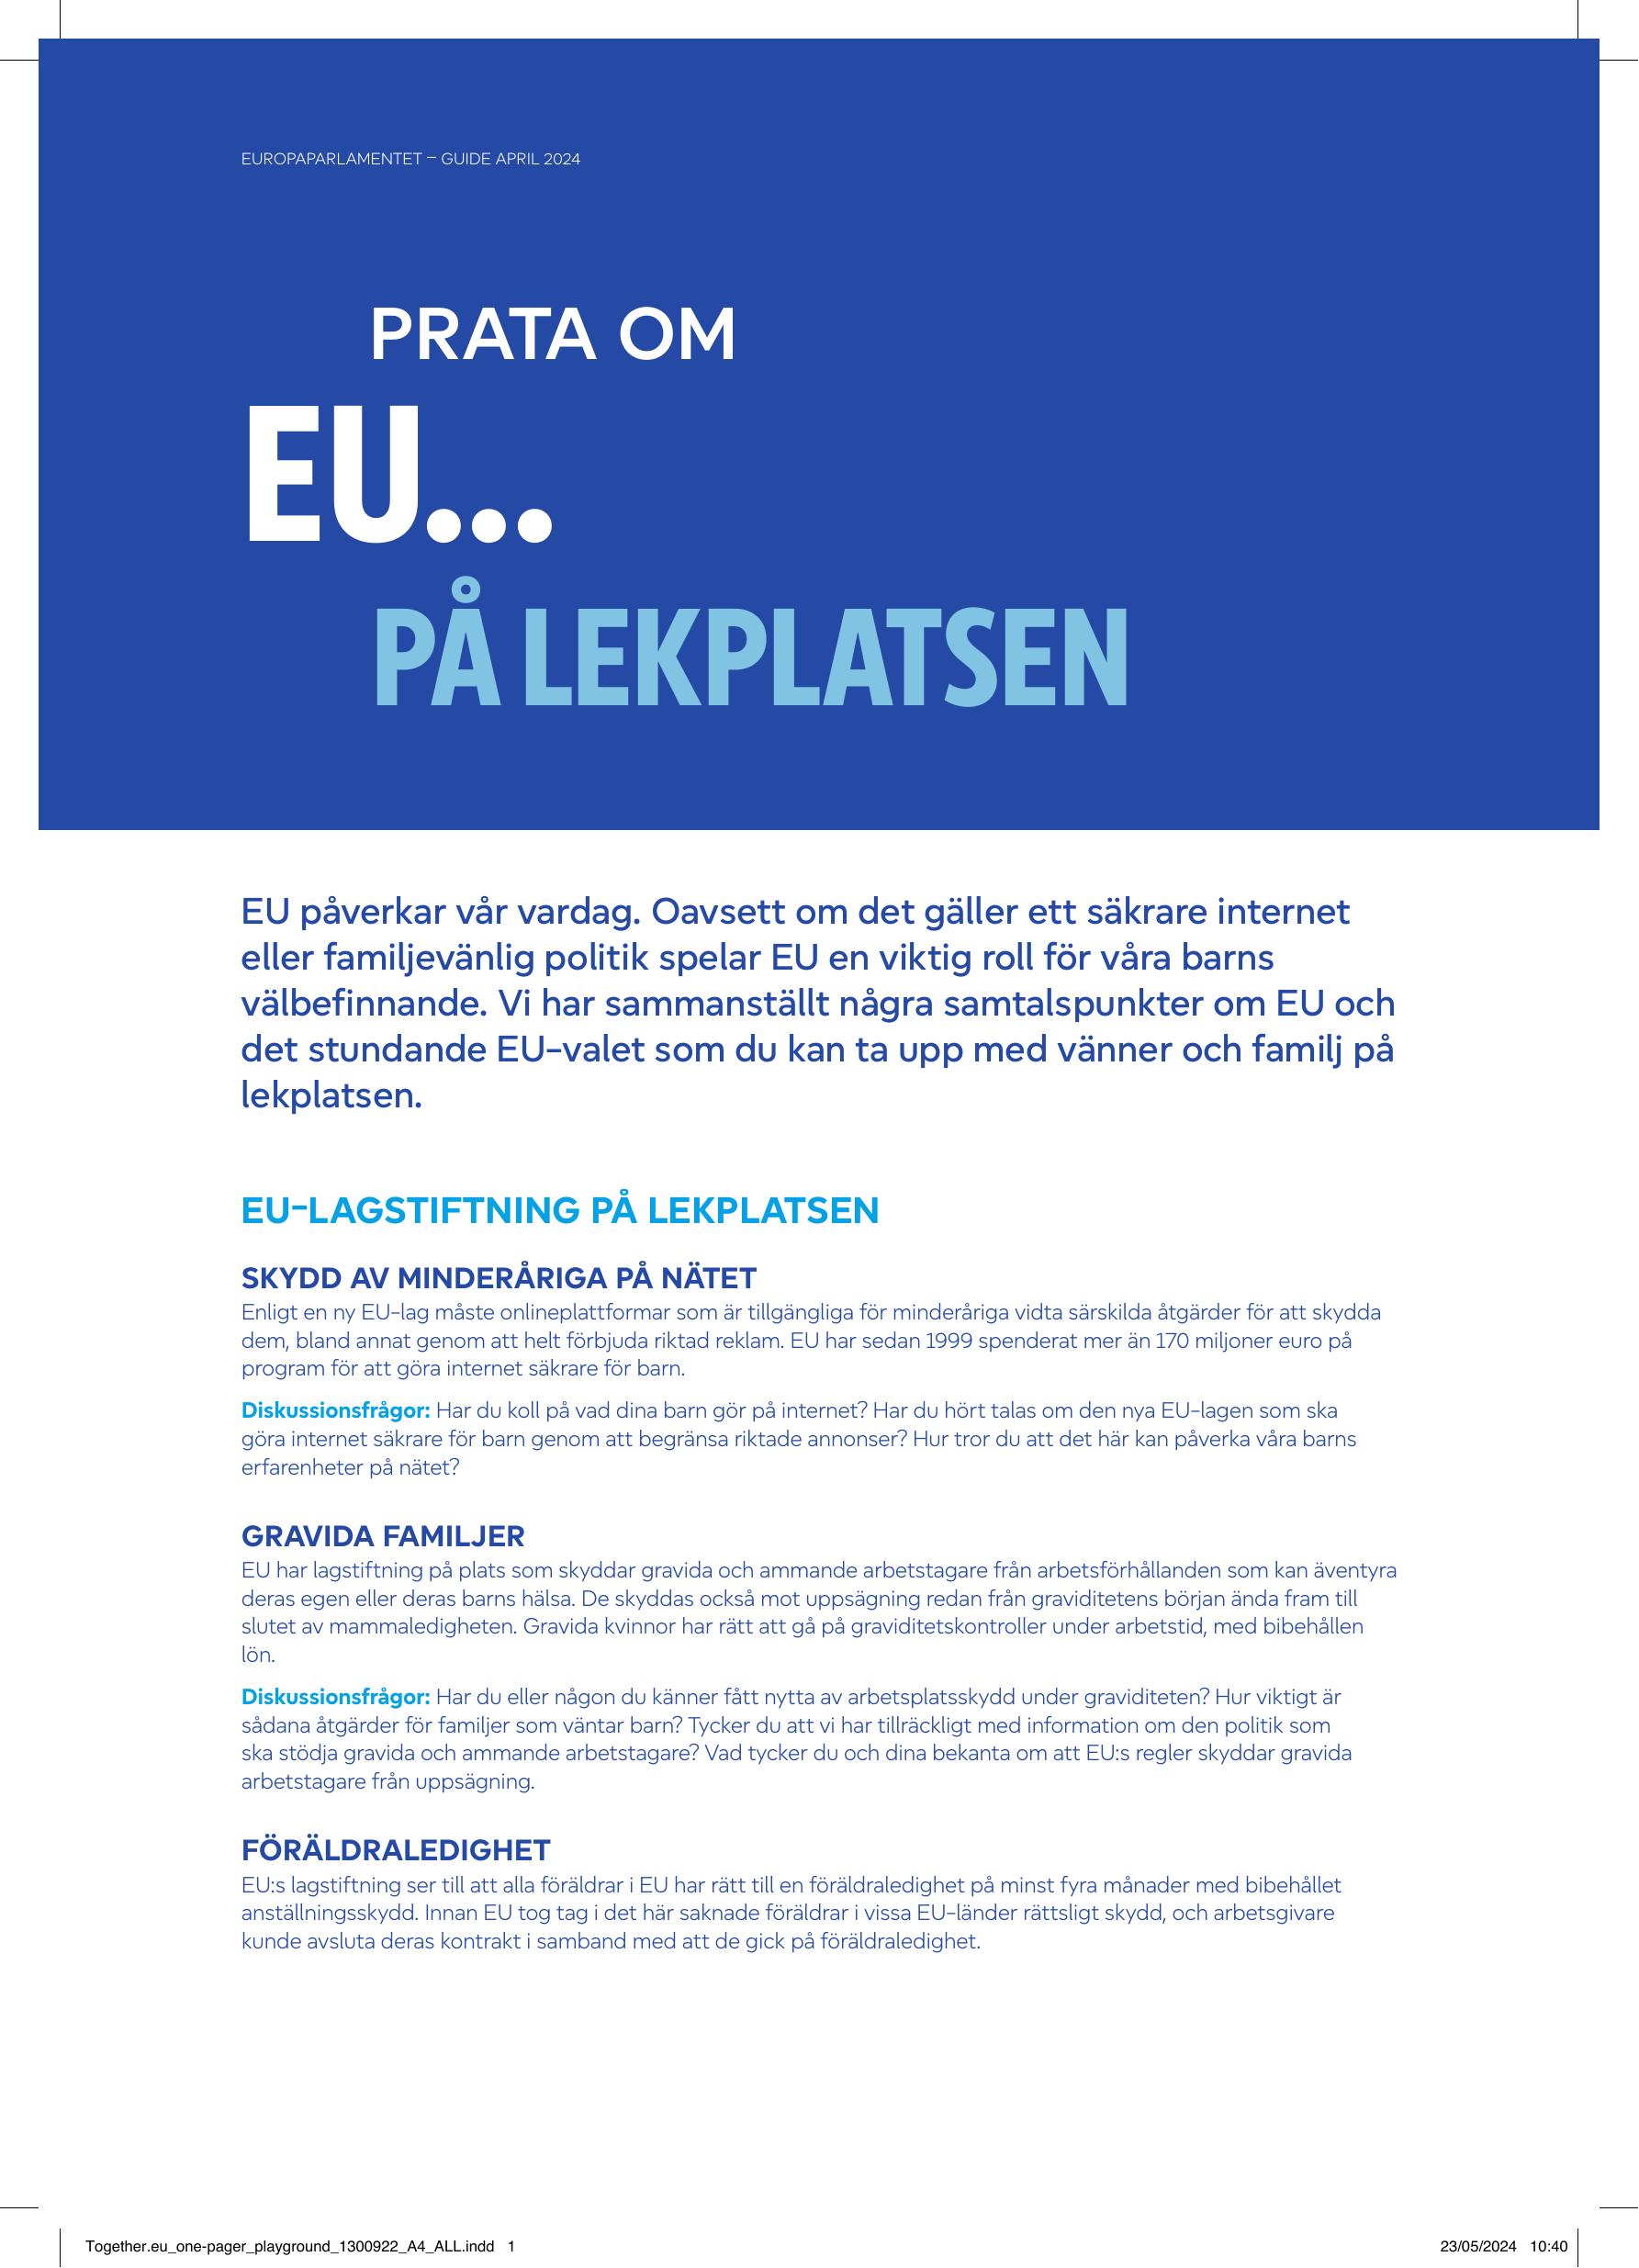 Together.eu_one-pager_playground_print.pdf